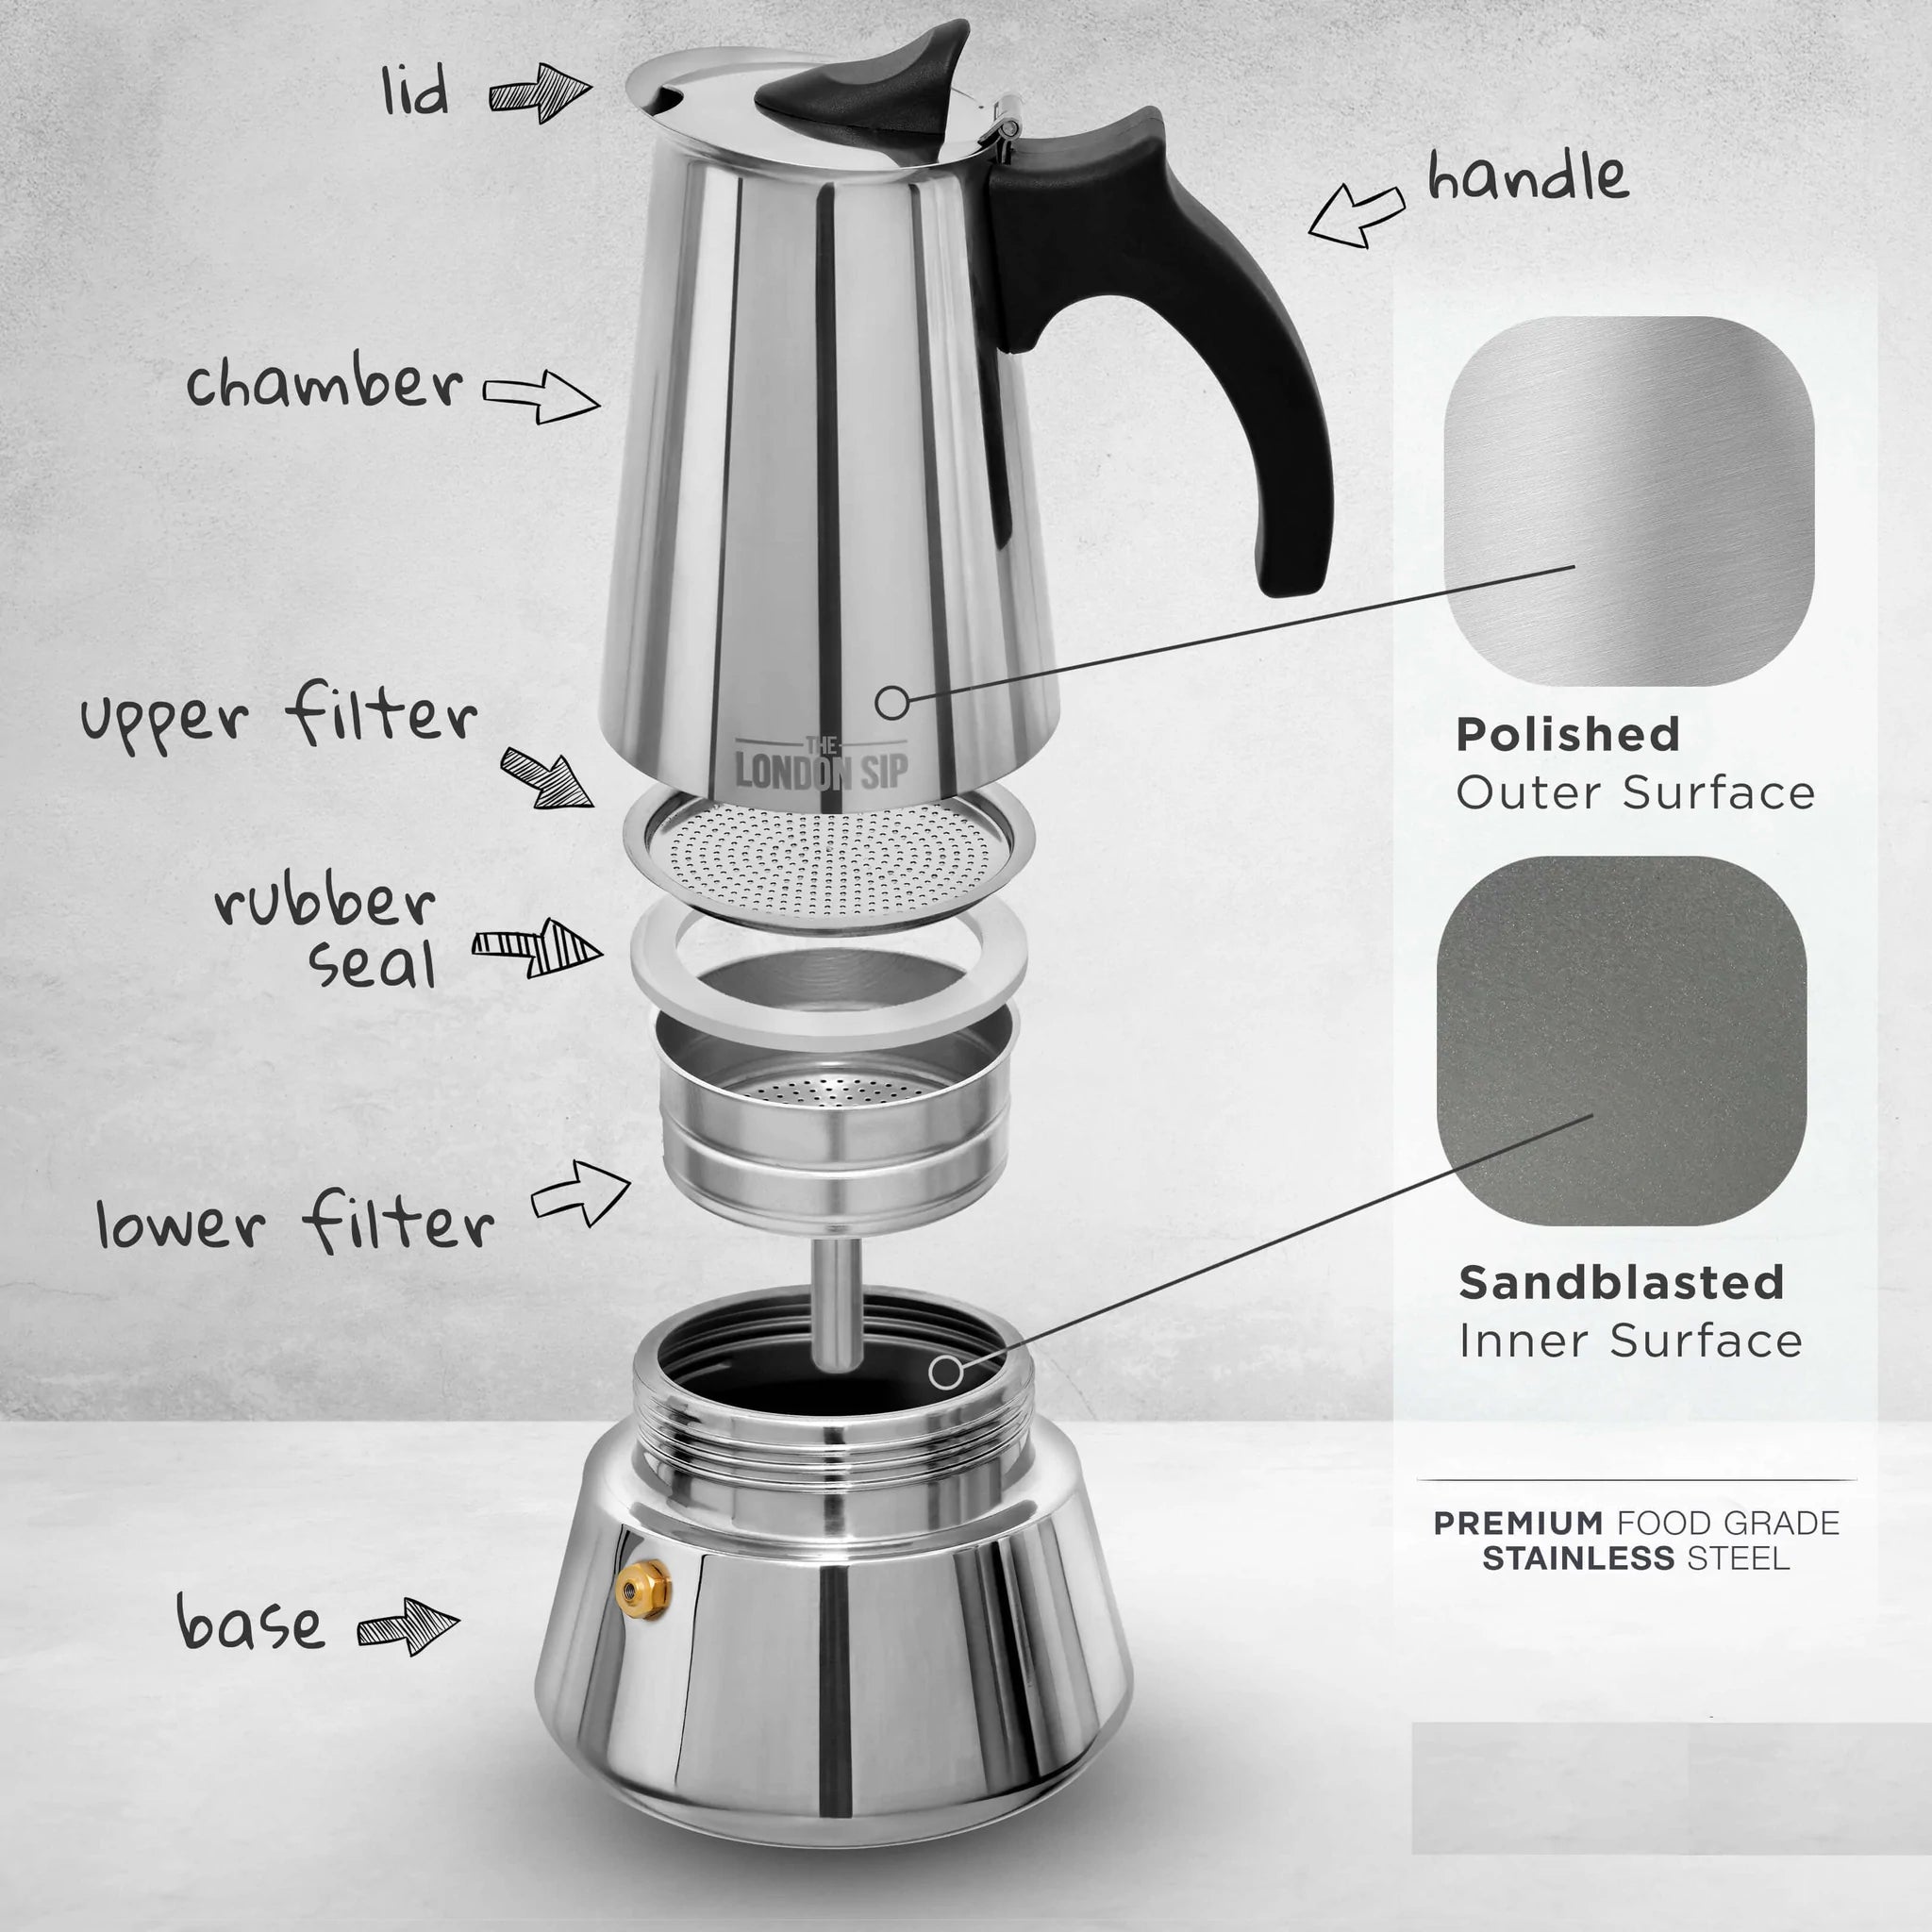 London Sip Stainless Steel Espresso Maker, 3 Cup